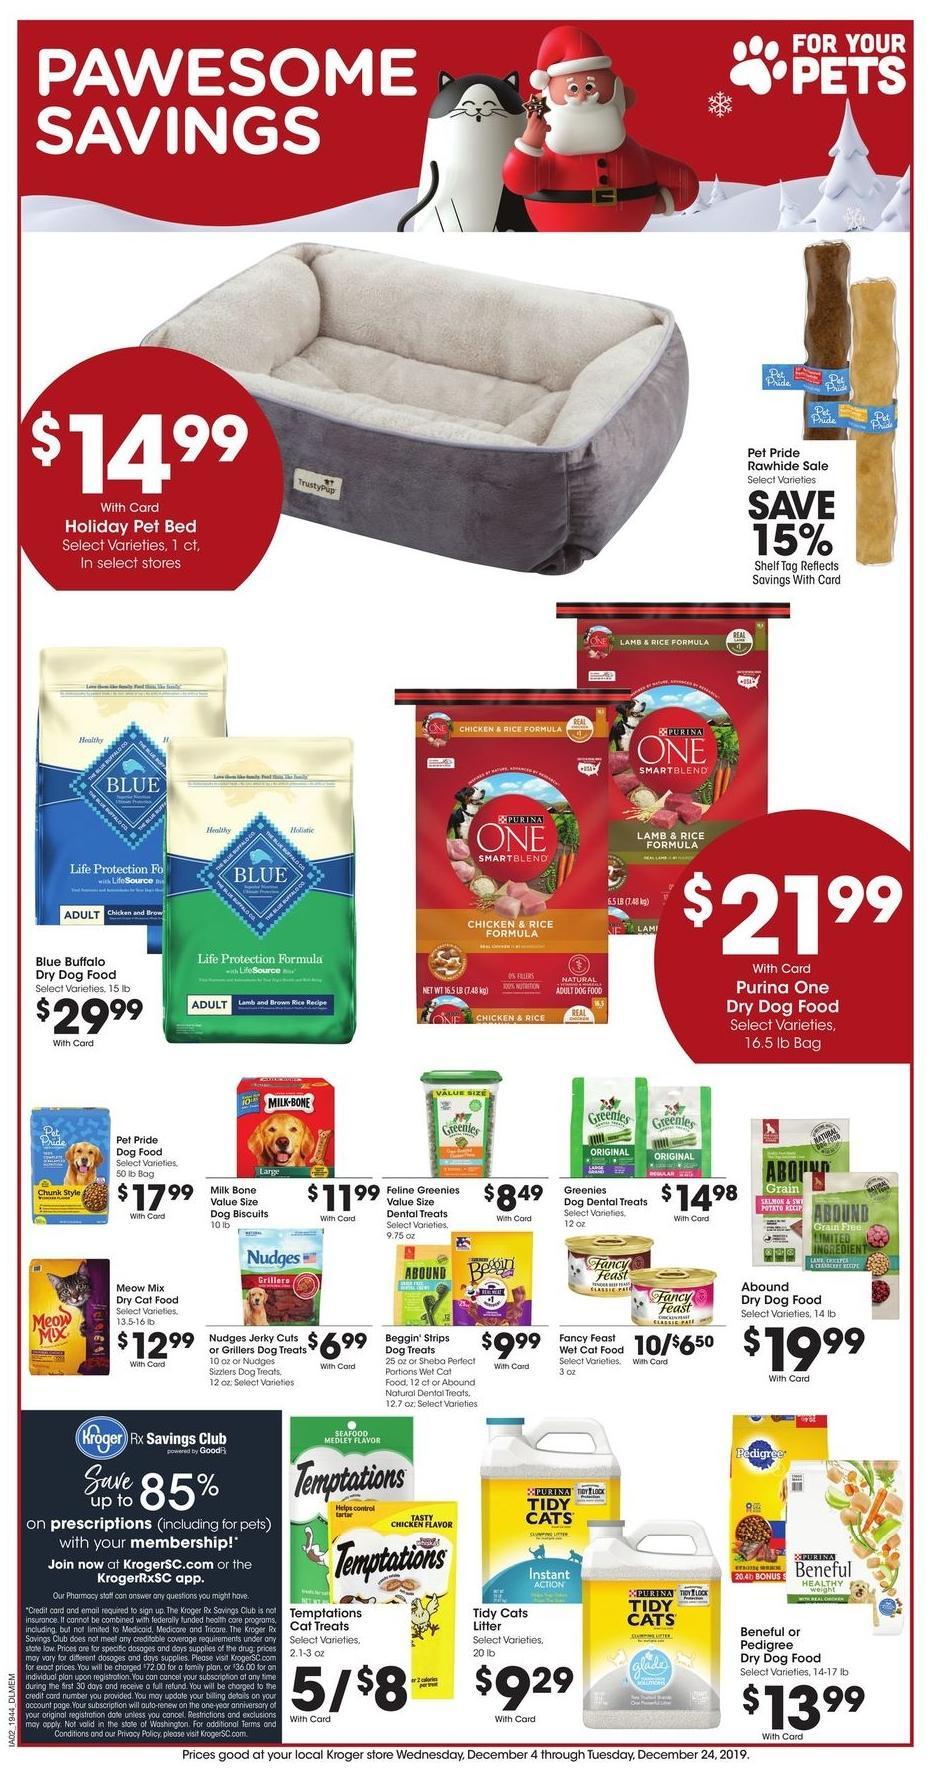 Kroger Weekly Ad from December 18